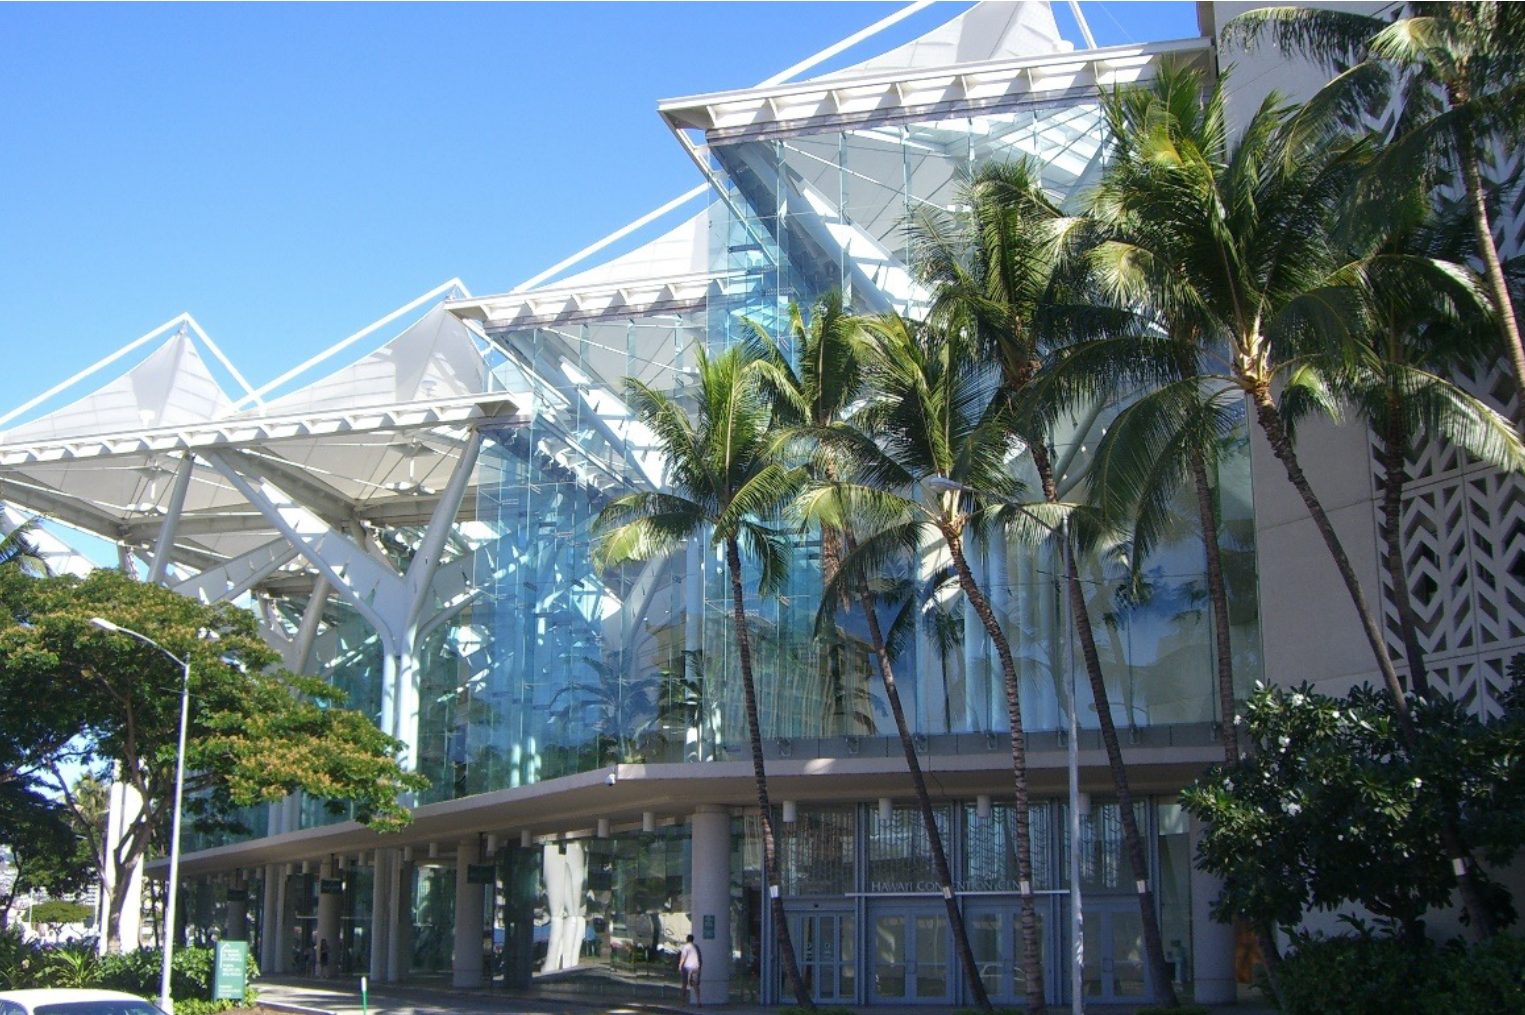 The Hawai’i Convention Center